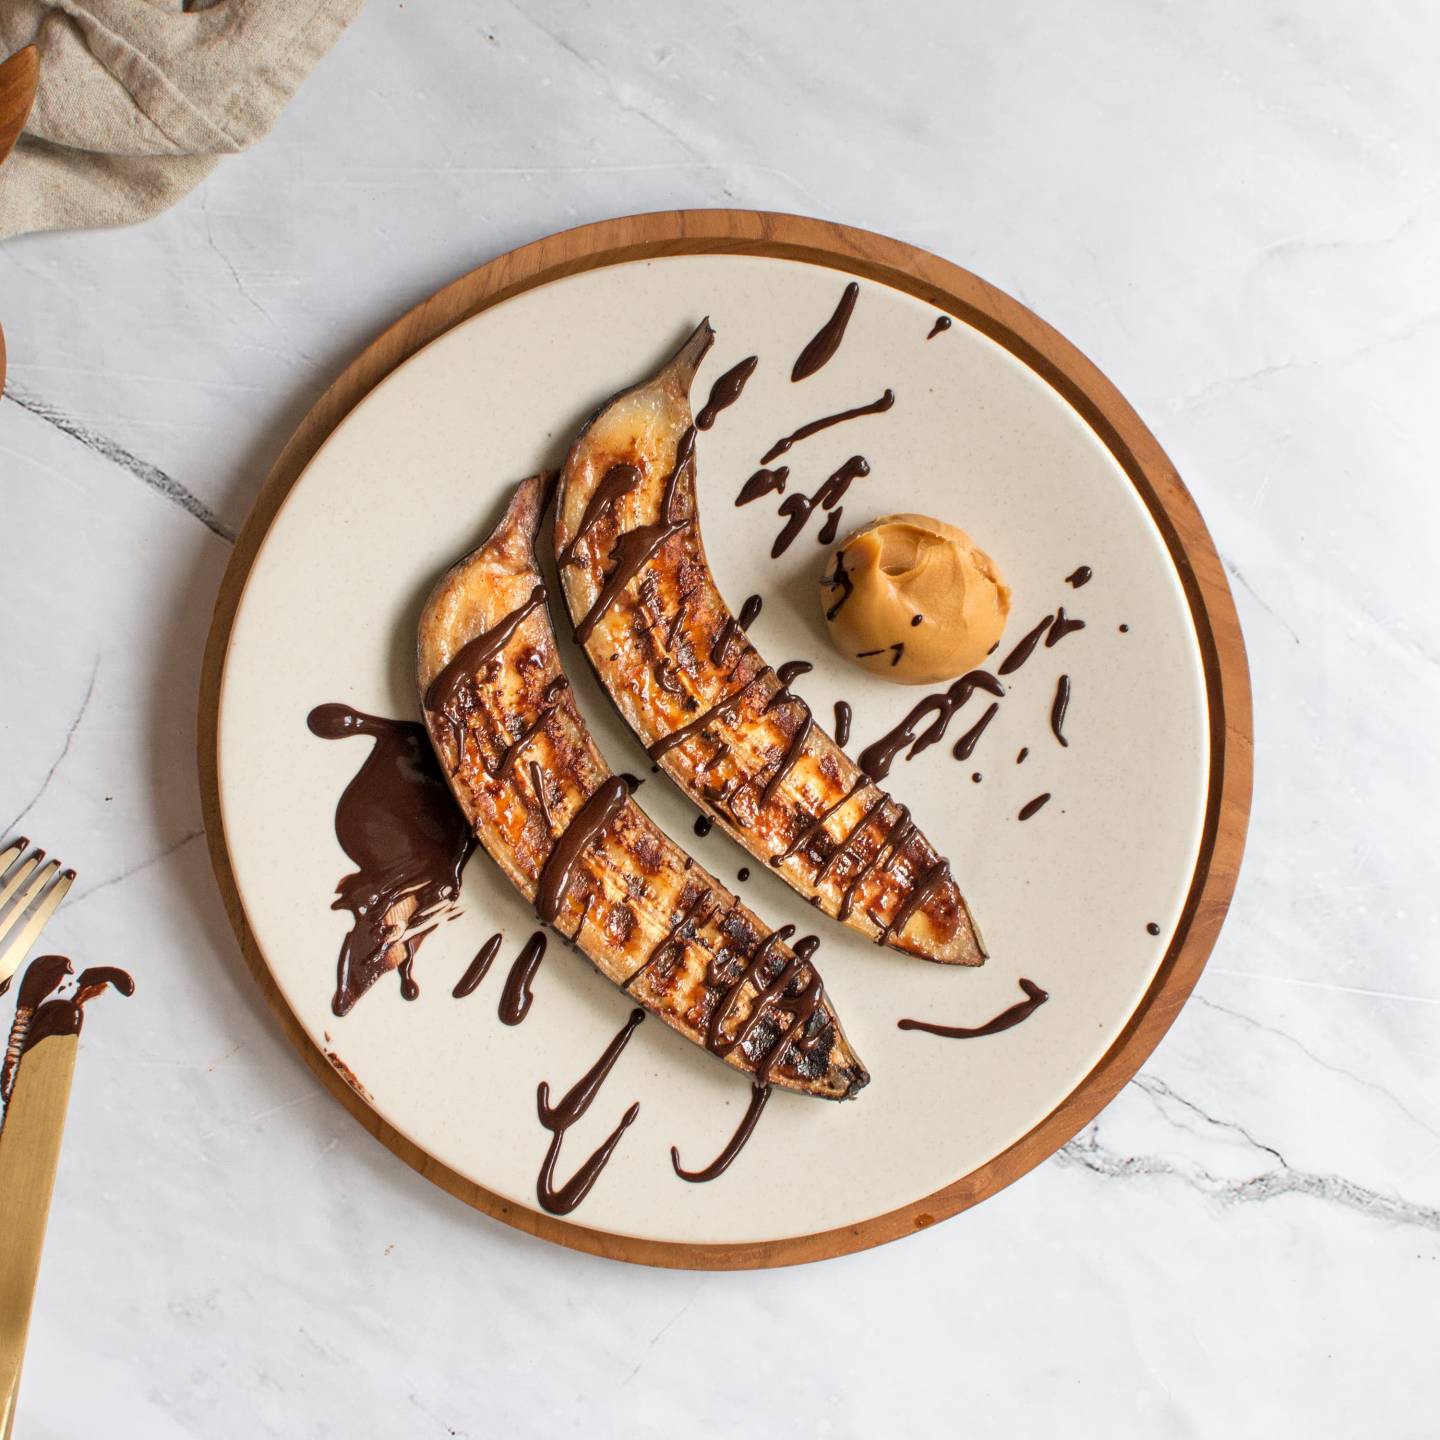 Grilled bananas on a plate with peanut butter, chocolate, and cinnamon. 